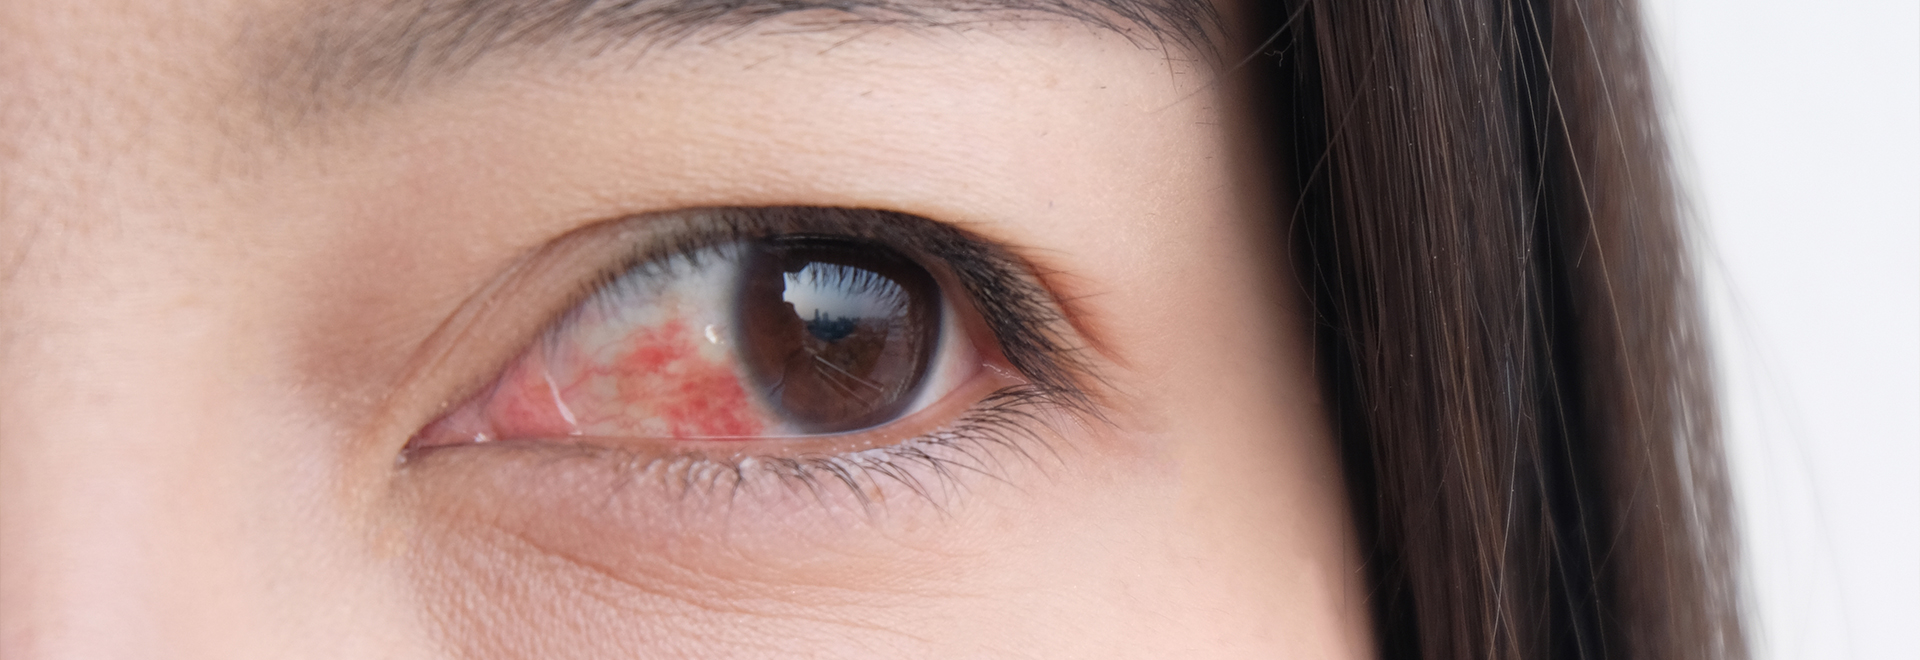 red-eyes-syndrome-causes-symptoms-and-treatment-of-conjunctivitis